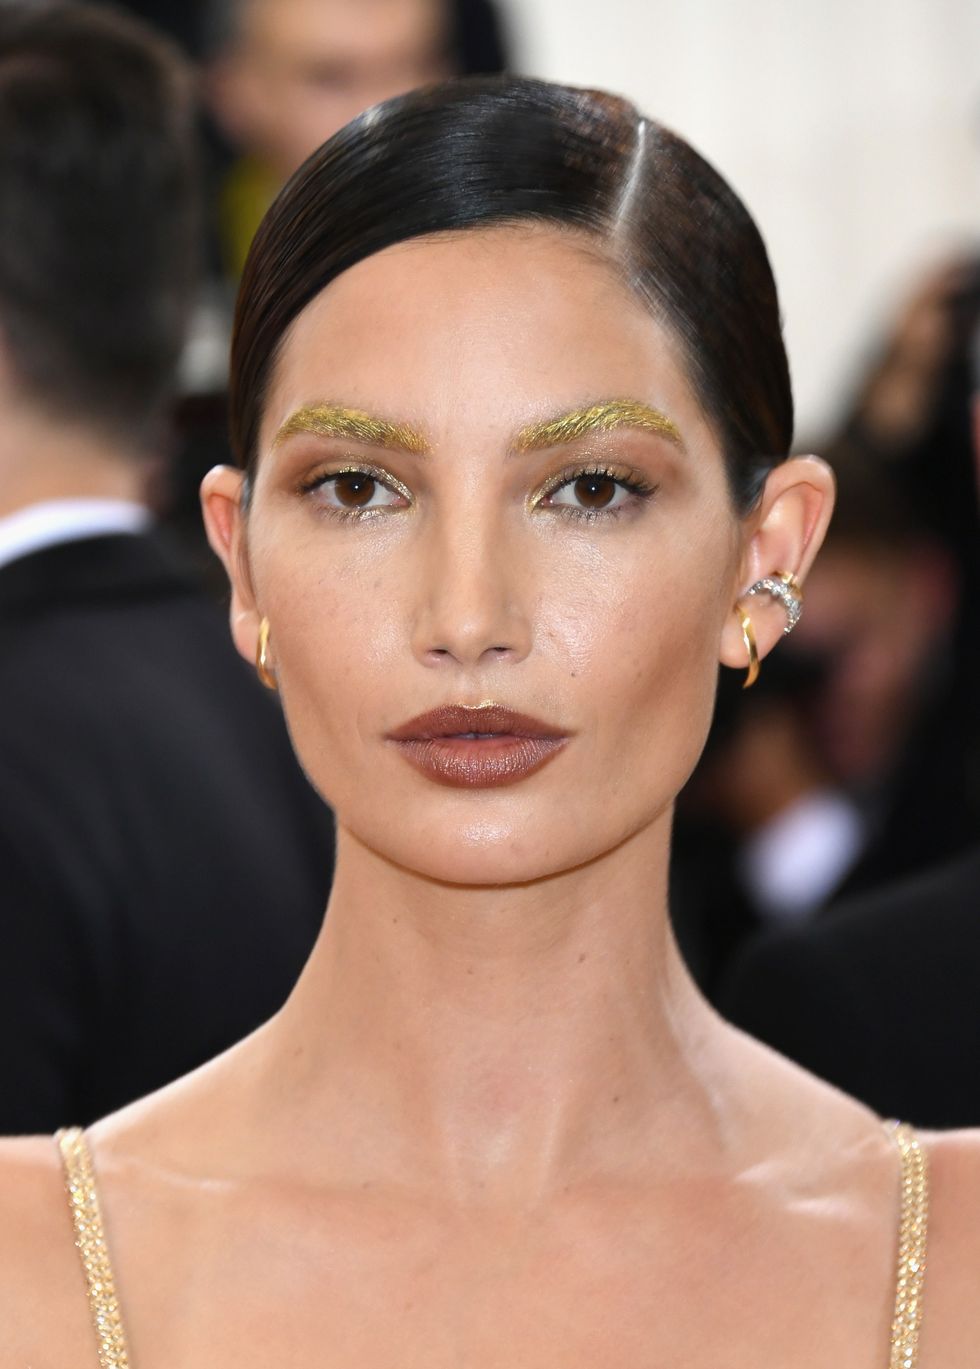 Lily Aldridge's Beauty Routine - Ballet, Braids, And Gold Brows